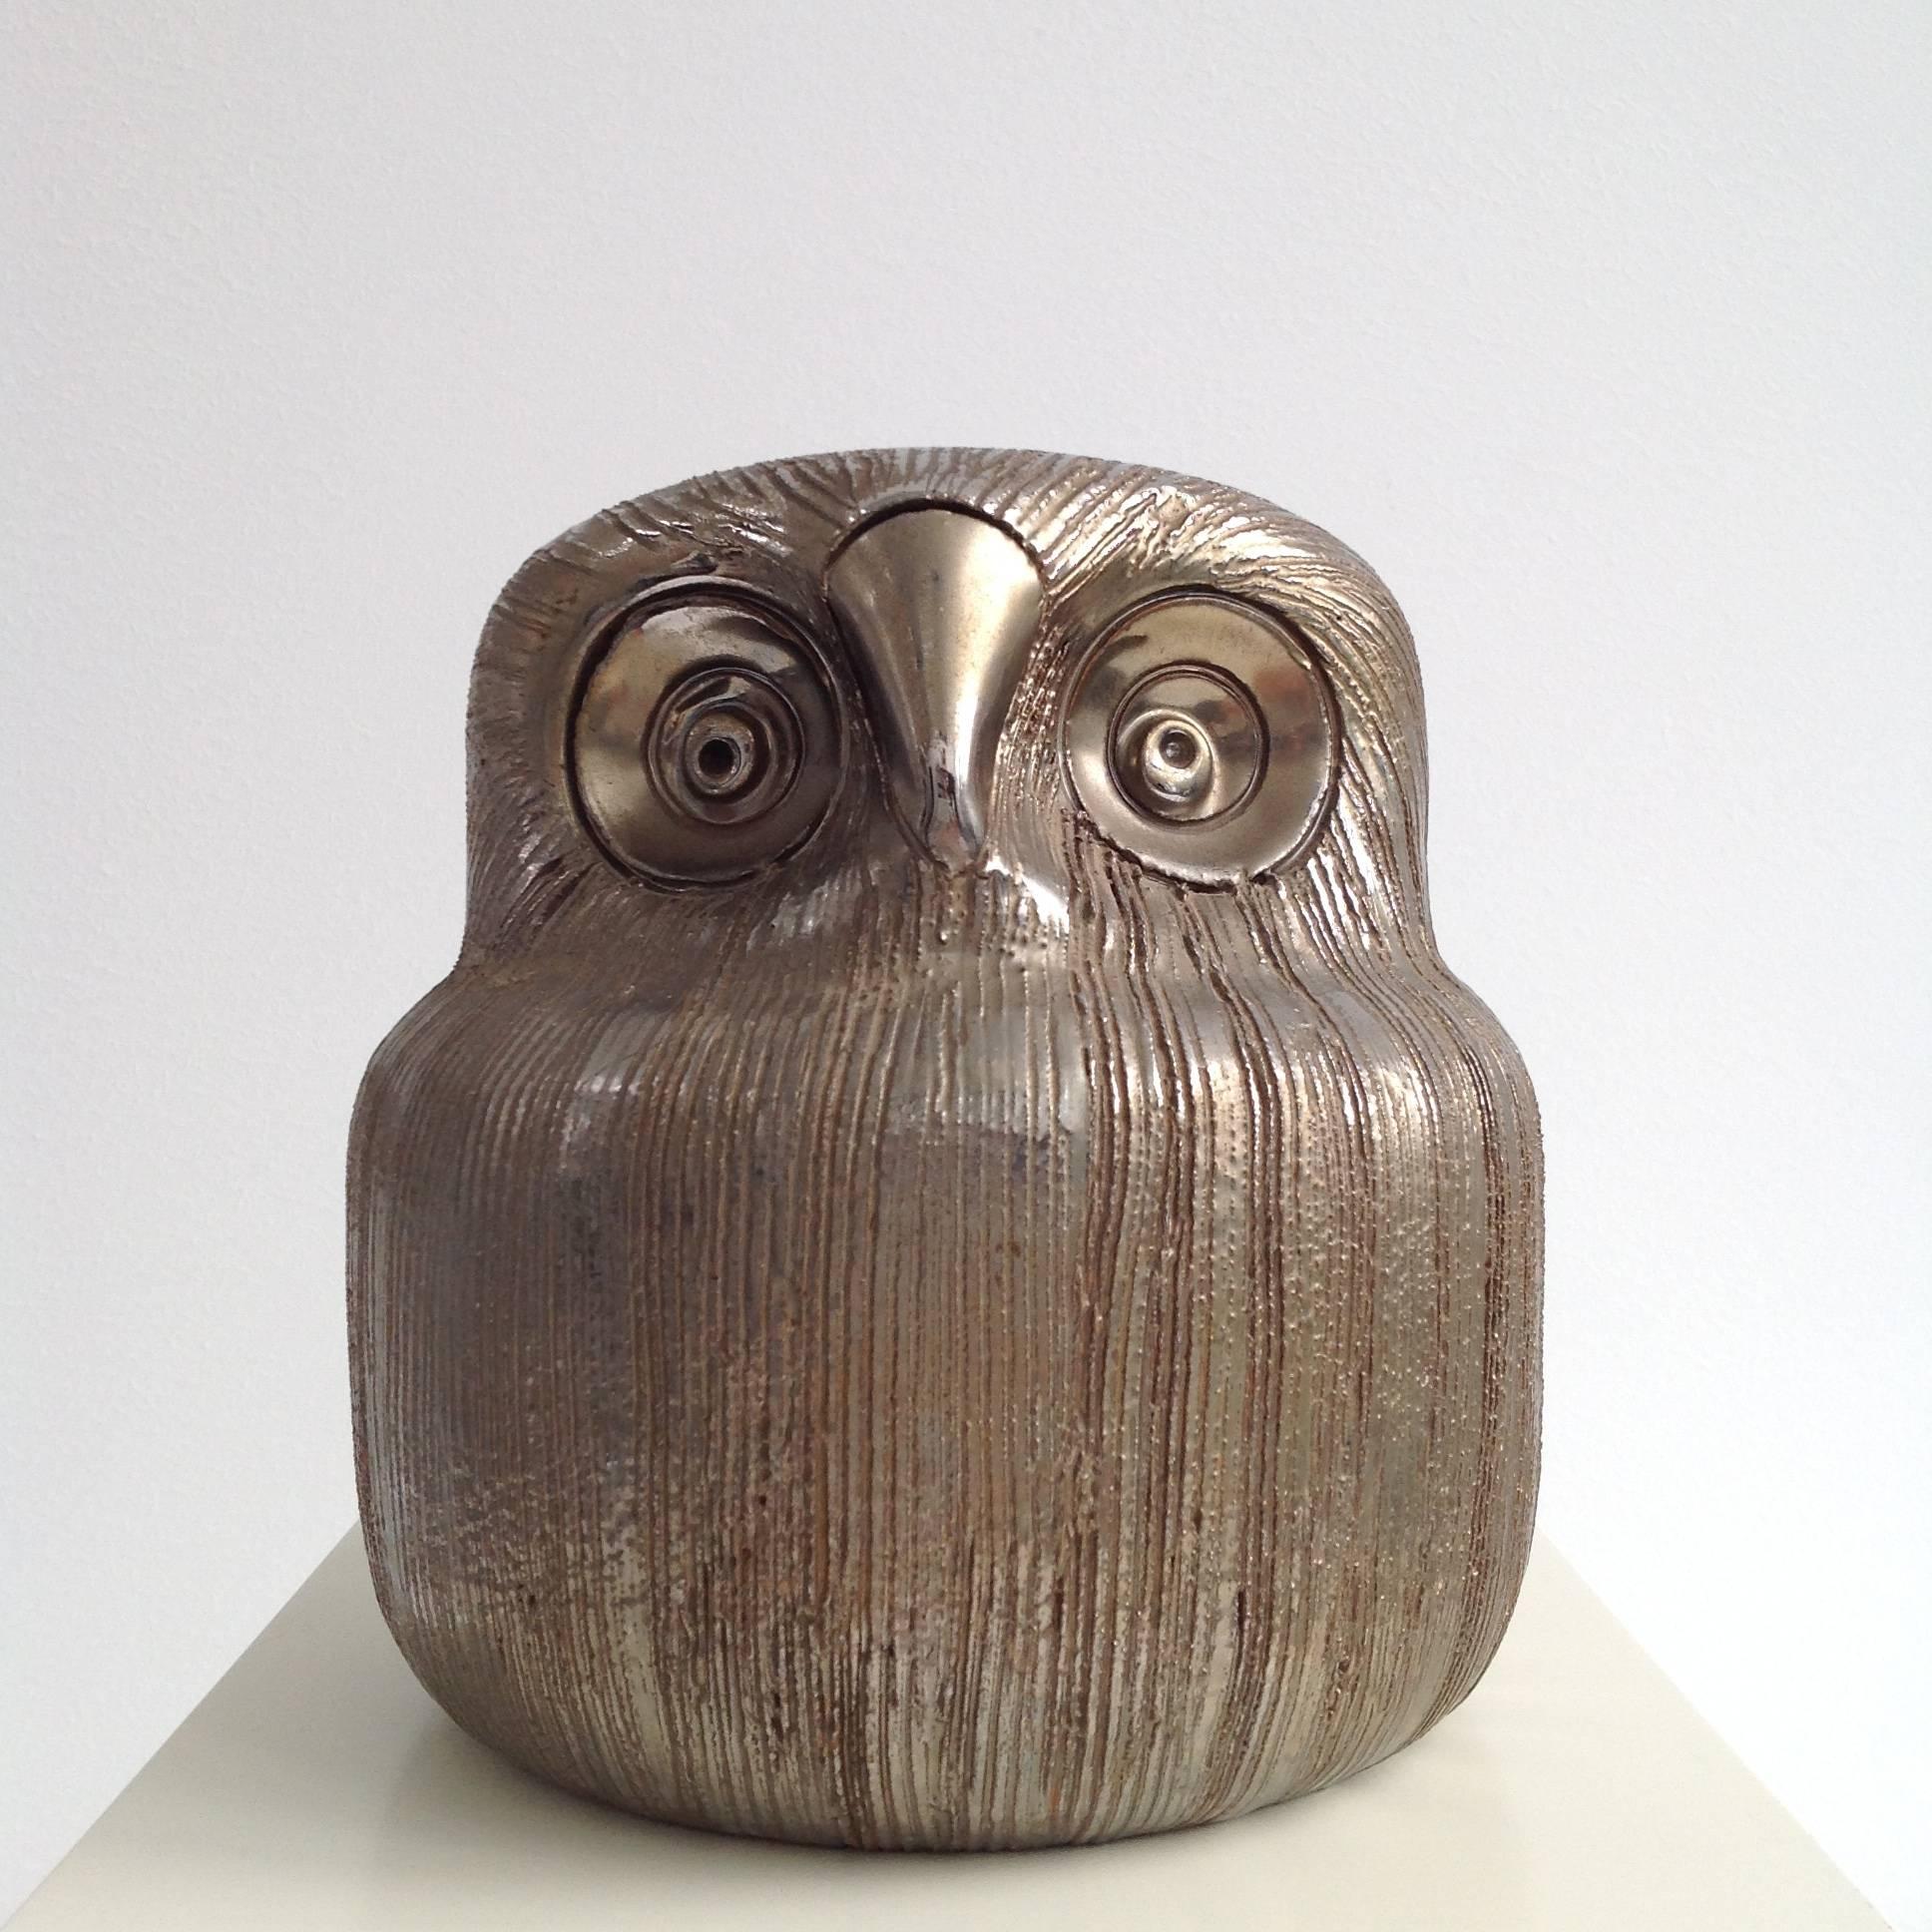 A beautifully executed Italian modernist polychrome glazed ceramic sculpture of a standing owl this a true gem with great poise and character. No signature.

More pictures and with a higher resolution are available on request. With over 25 year's